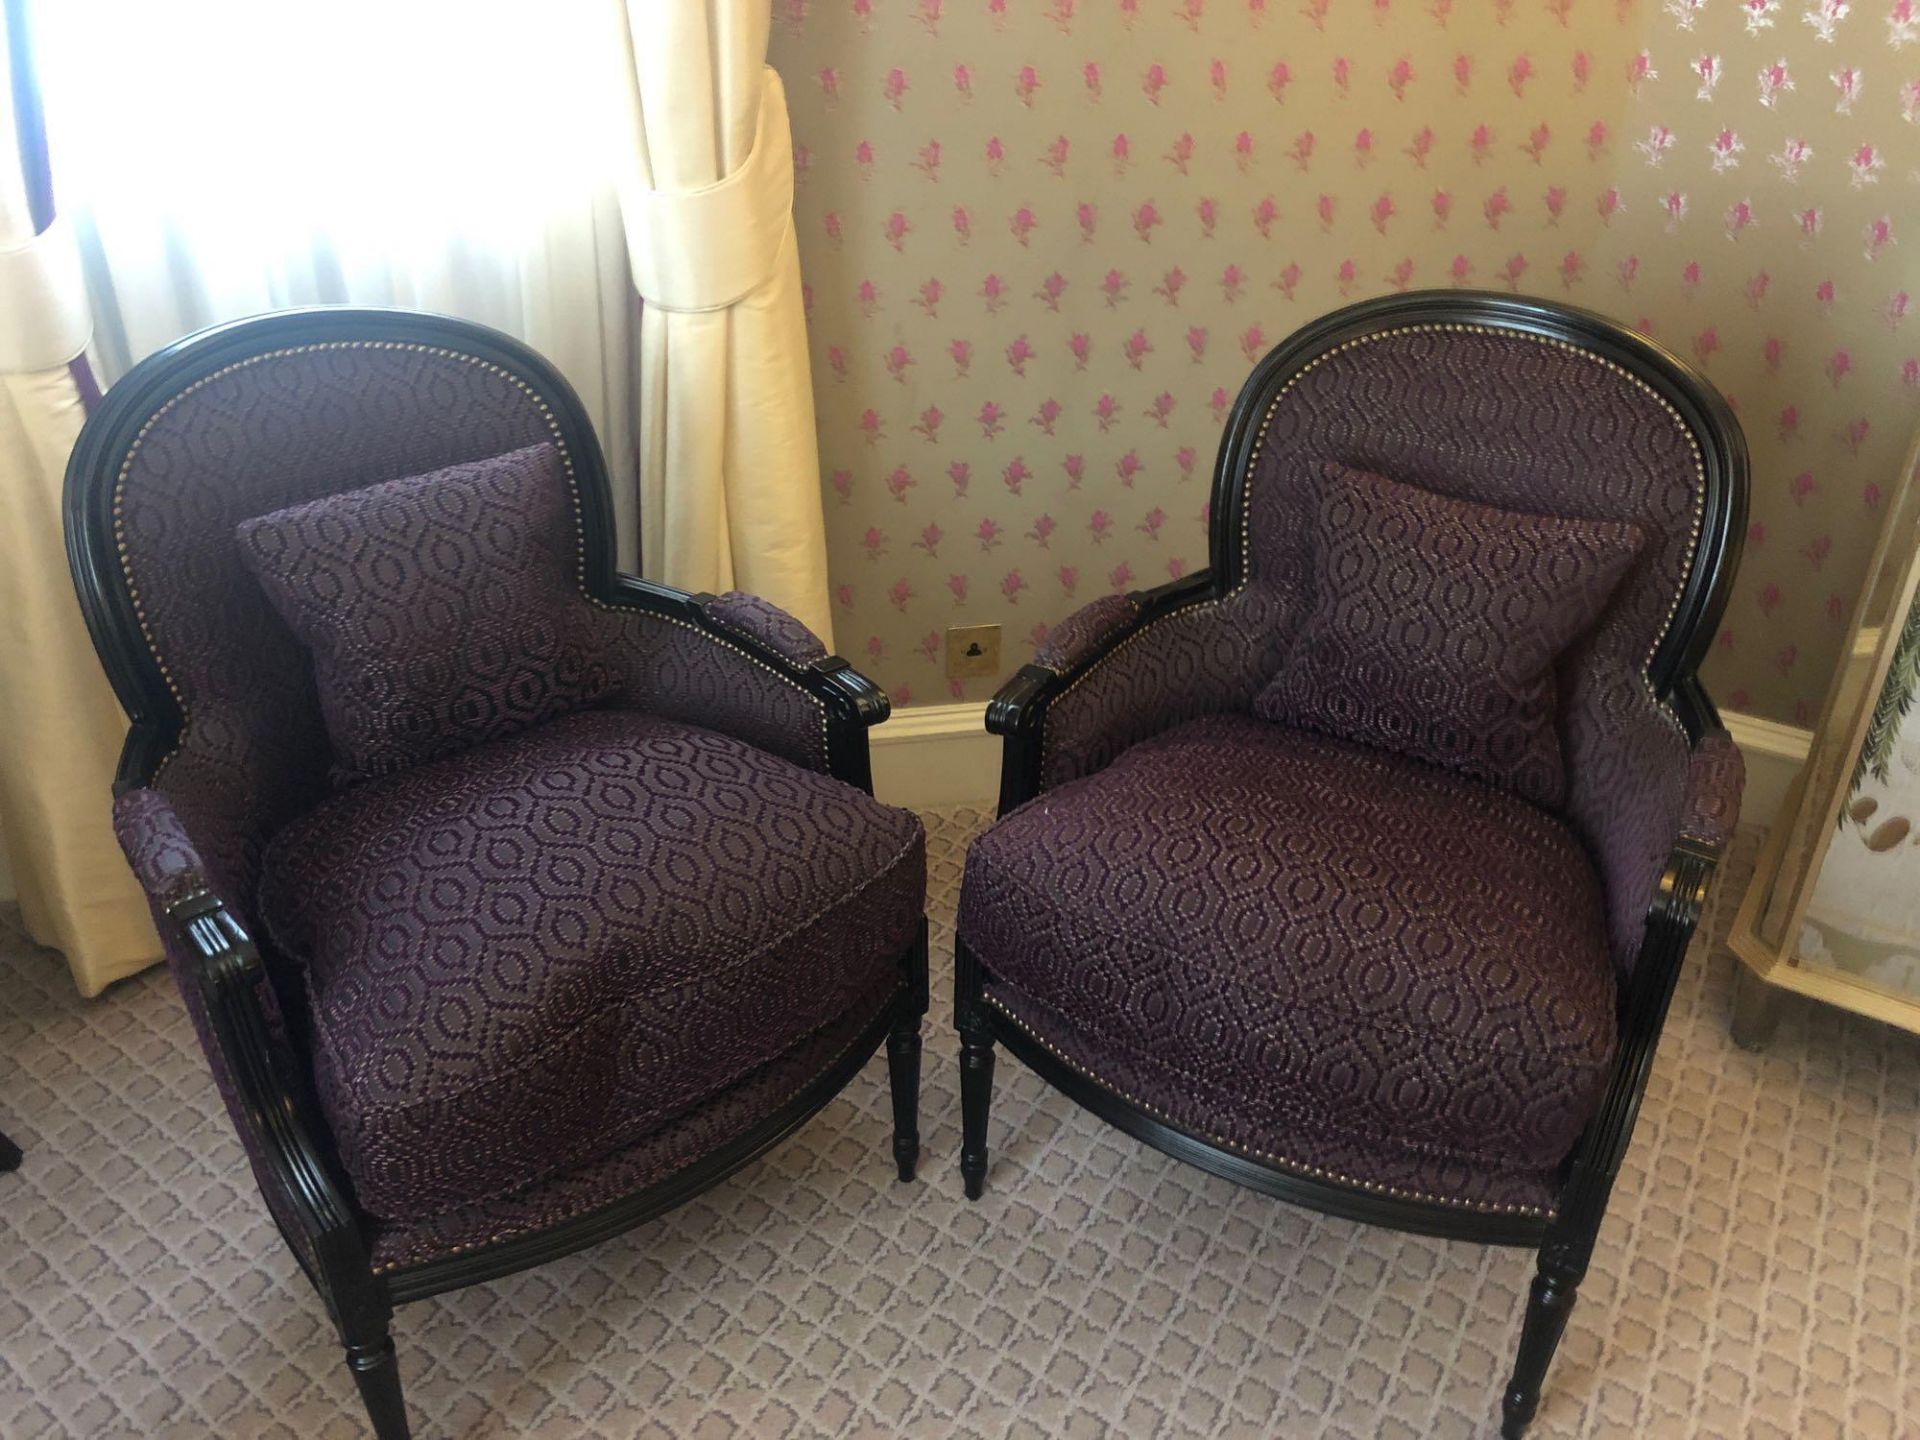 A Pair Of Bergere Chair Black Wood Frame Upholstered In A Dark Mauve Pattern With Stud Pin Detail 66